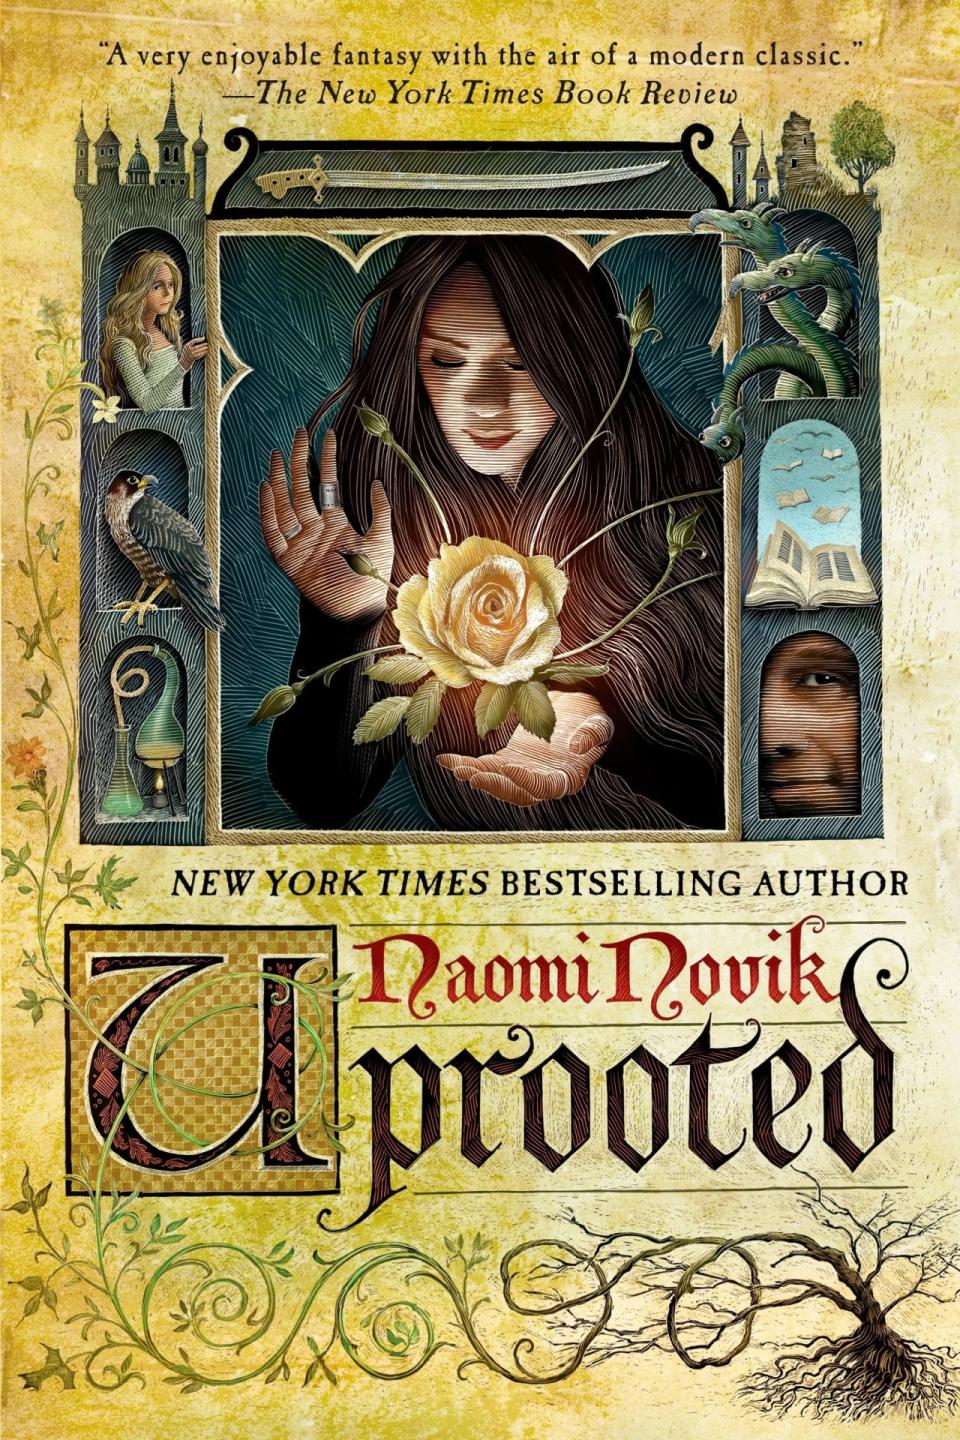 Uprooted book fantasy book cover